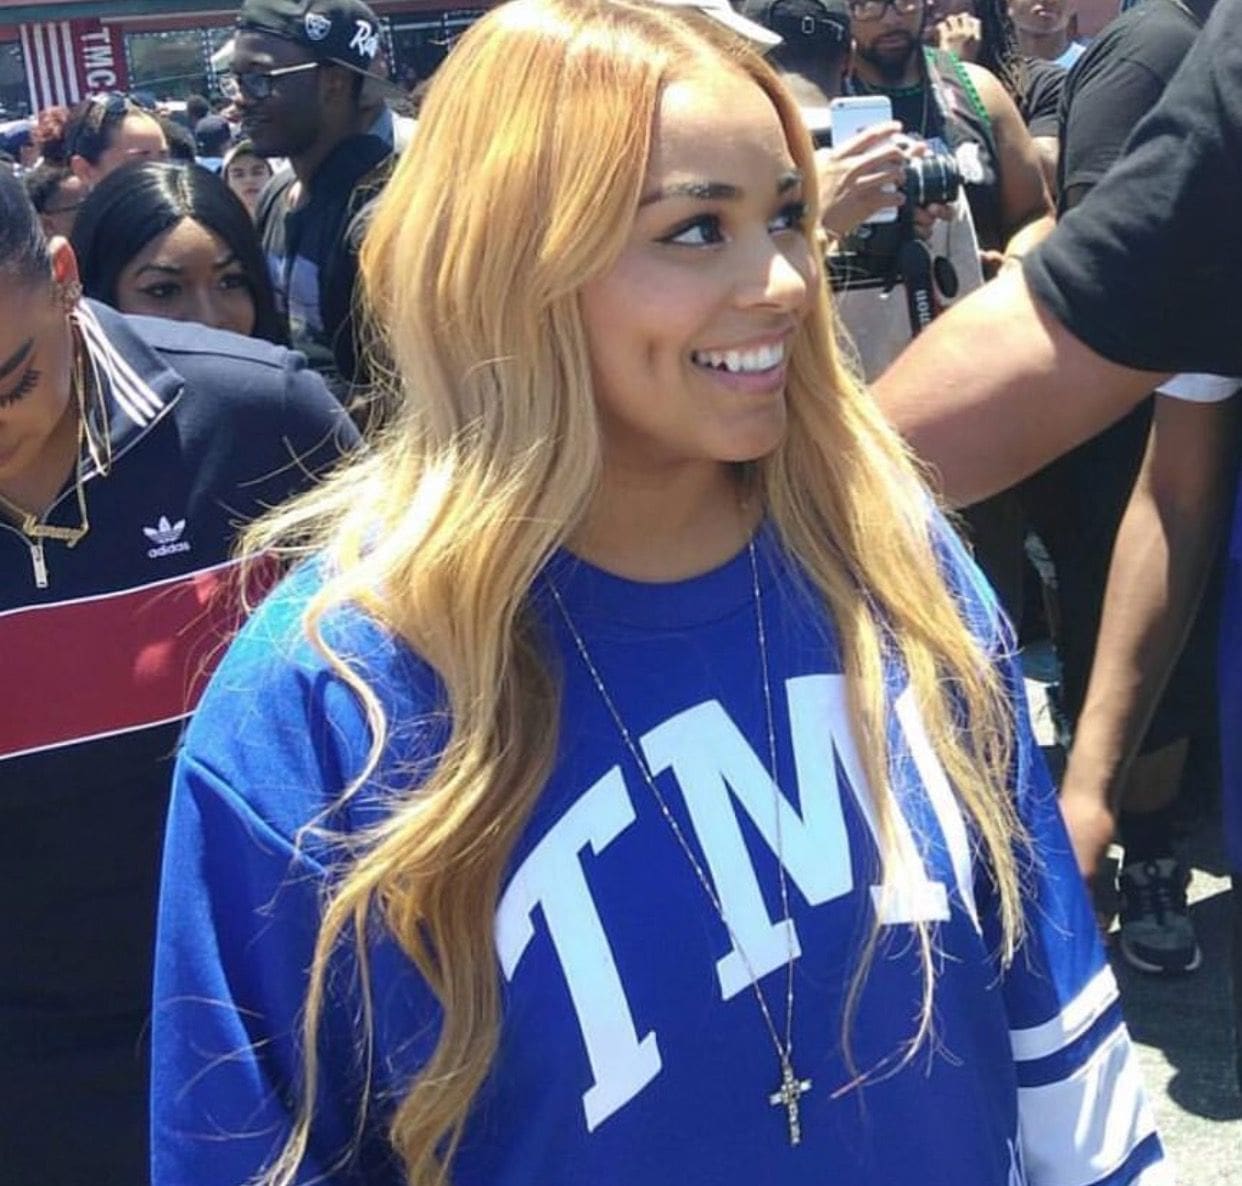 Lauren London Speaks On Celebrating Mother's Day Following Her Heartbreaking Loss - She Offers Uplifting Words To Those In Need